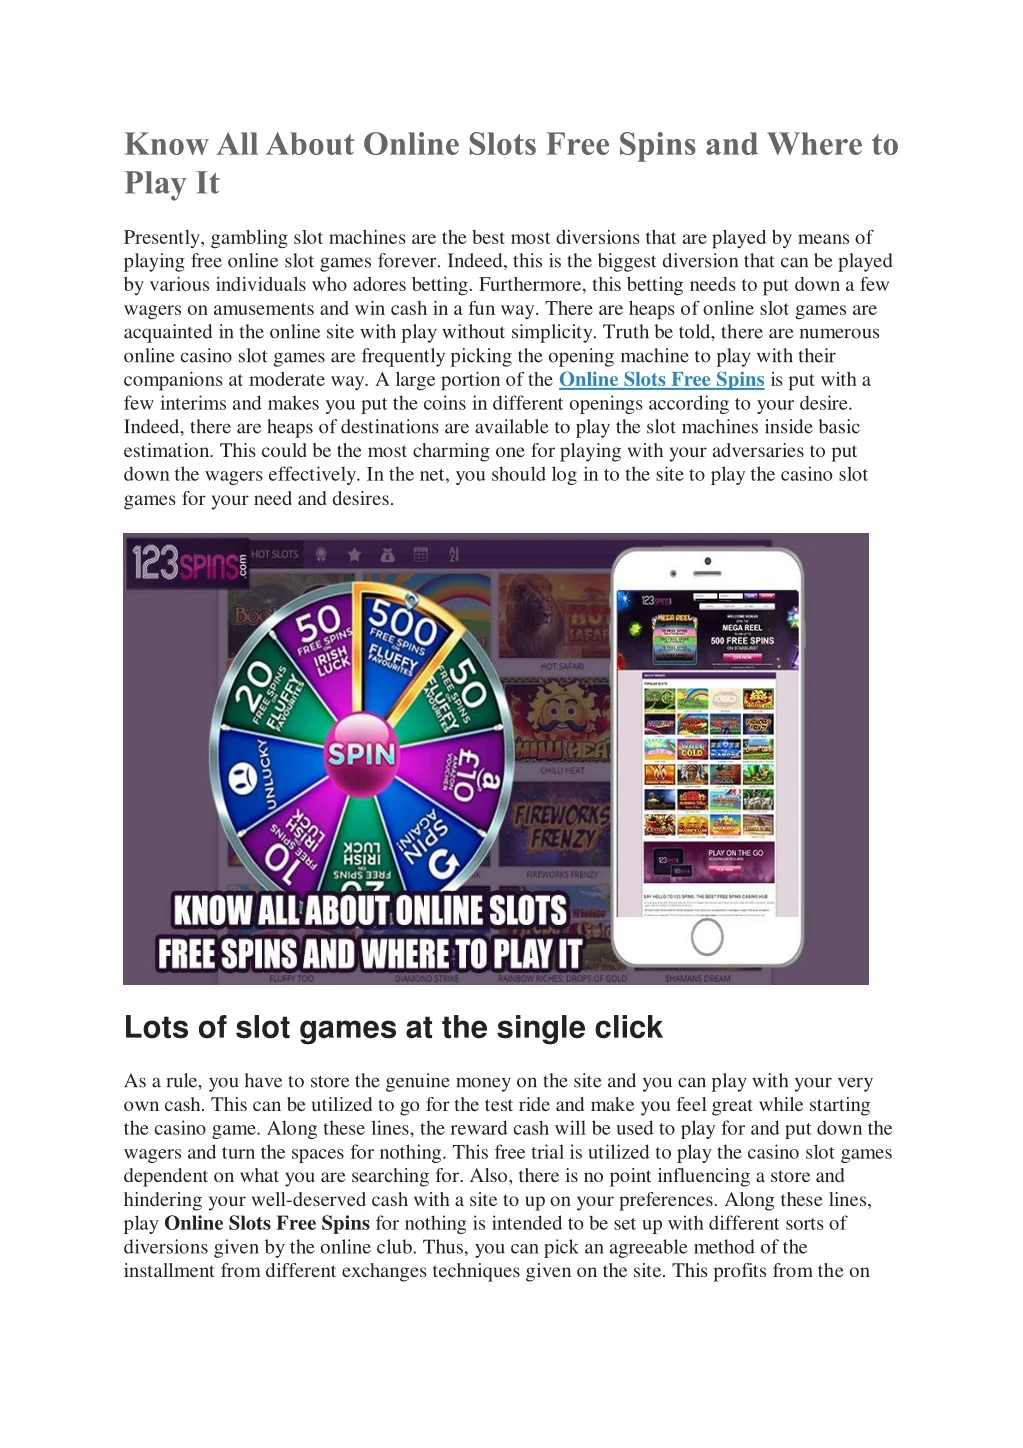 know all about online slots free spins and where